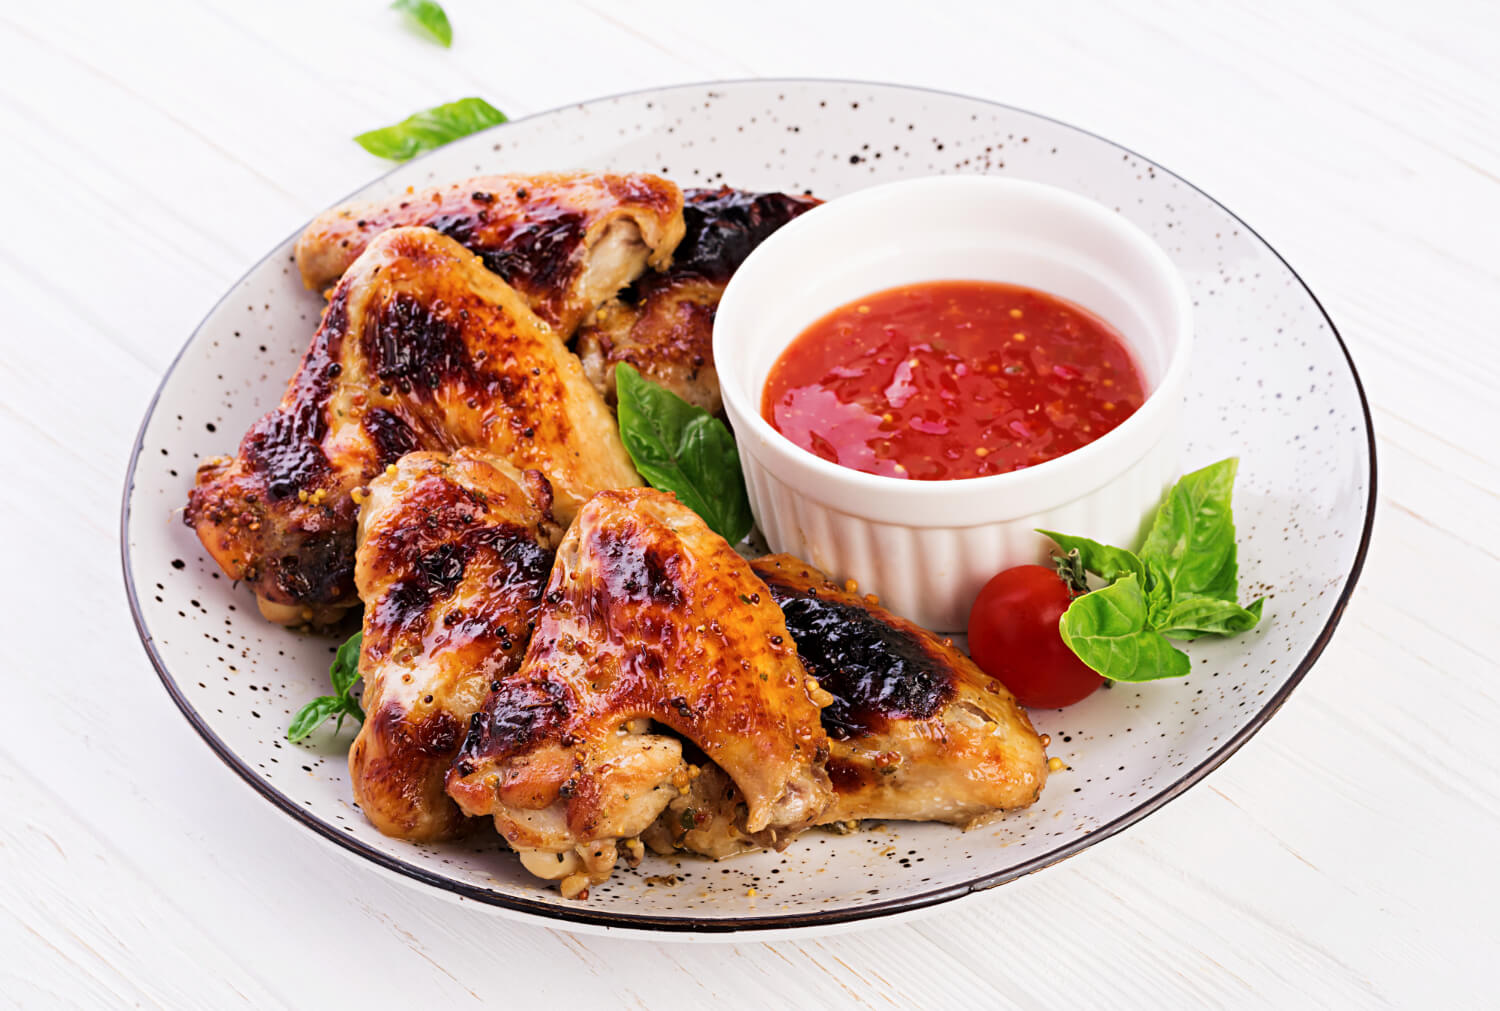 baked-chicken-wings-asian-style-tomatoes-sauce-plate.jpg